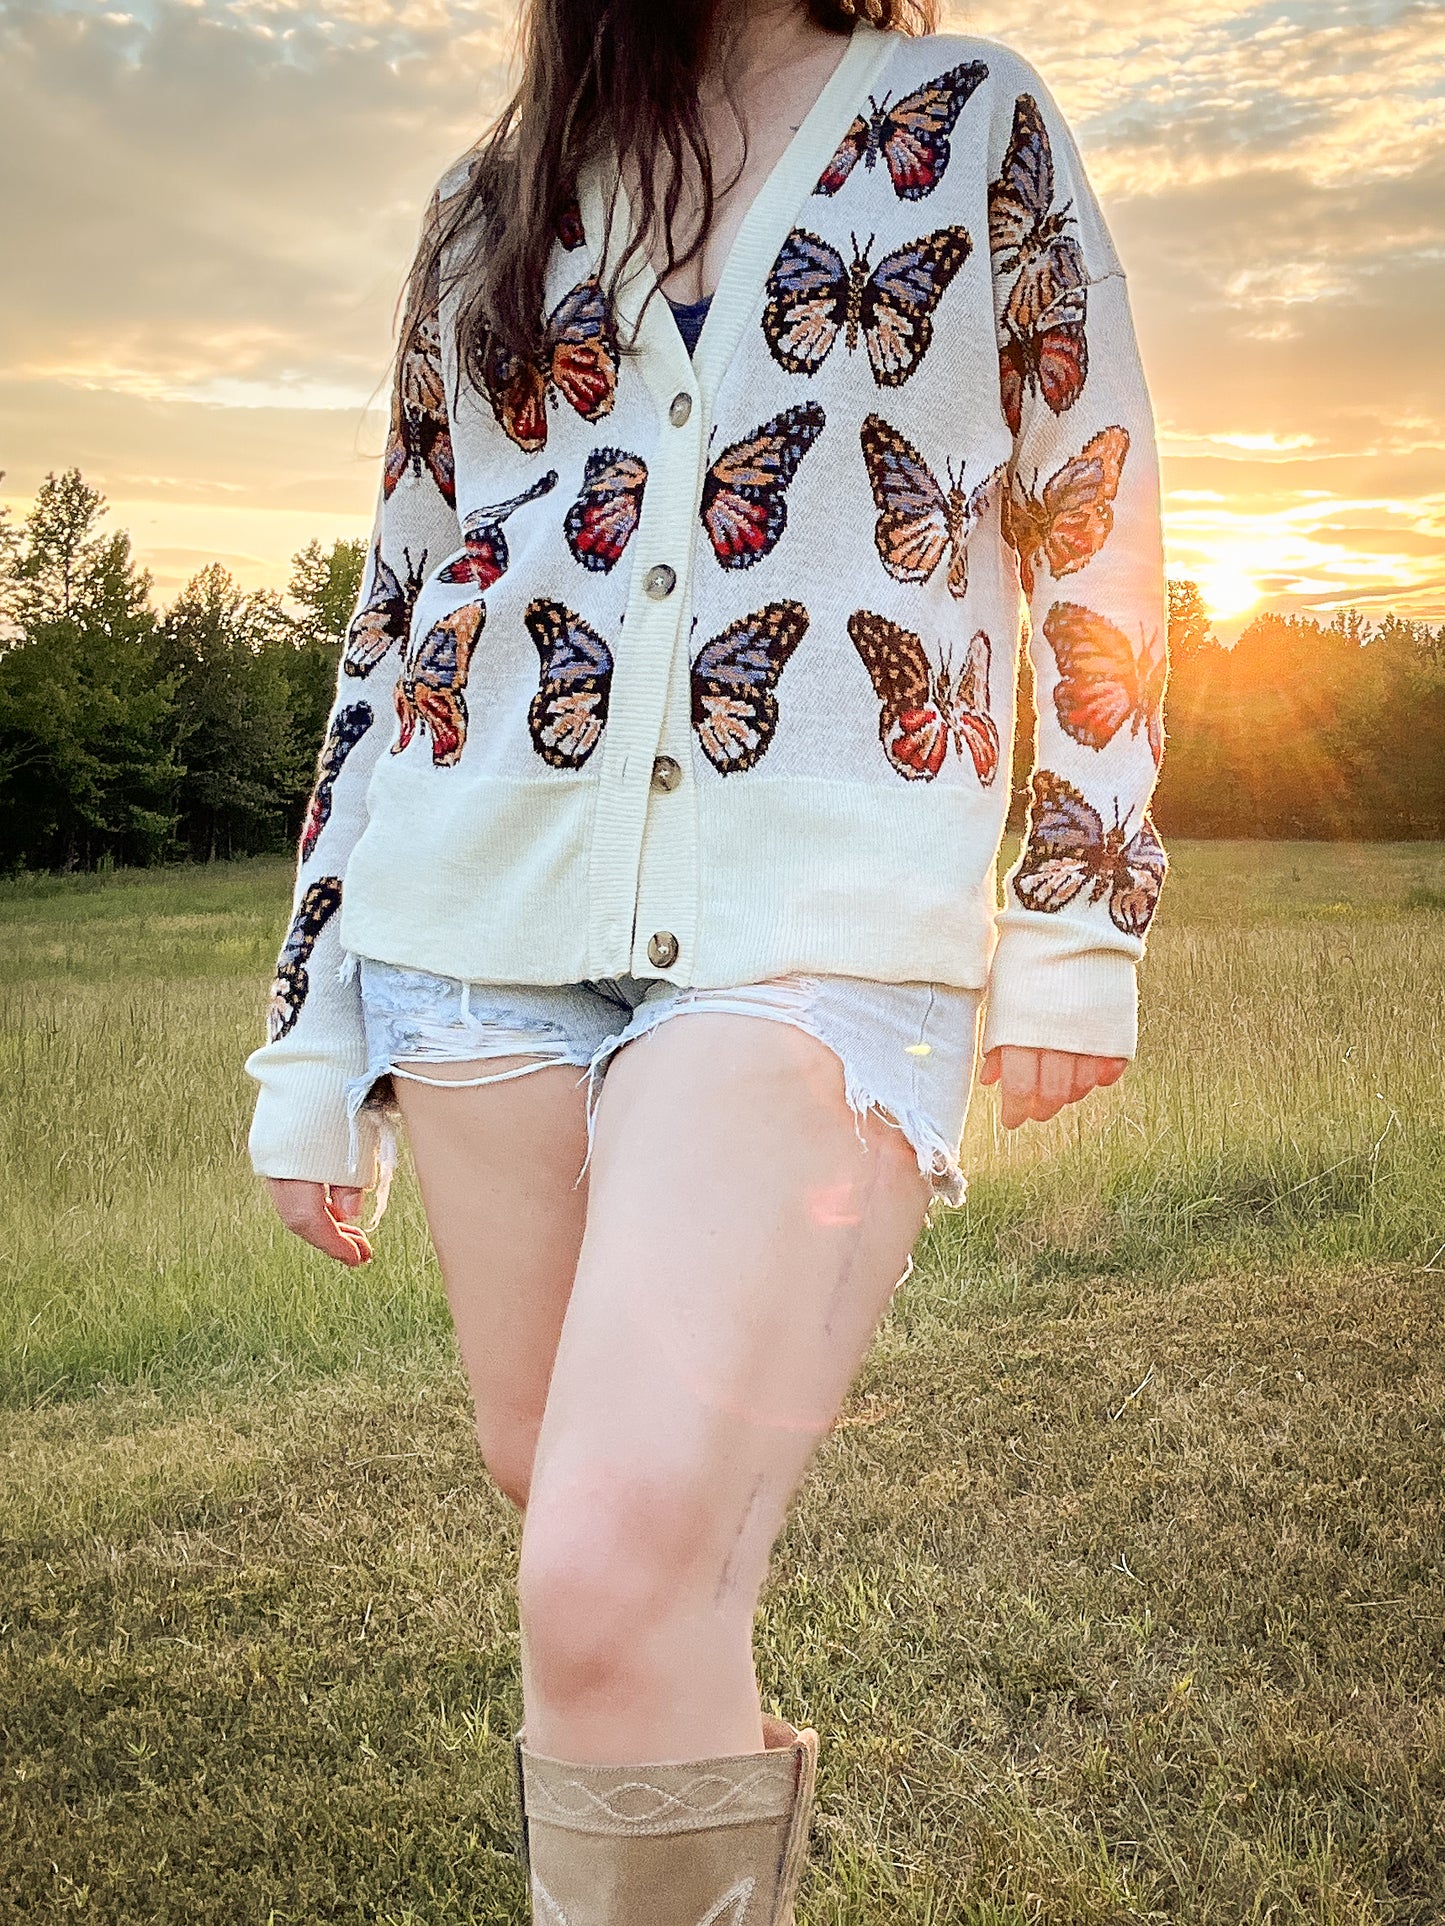 Closer view of Merino Wool Cardigan in Milky White with butterflies in shades of red, blue, tangerine, and black.  Made in family owned factory in Italy. Worn with denim cutoff shorts and cowboy boots.